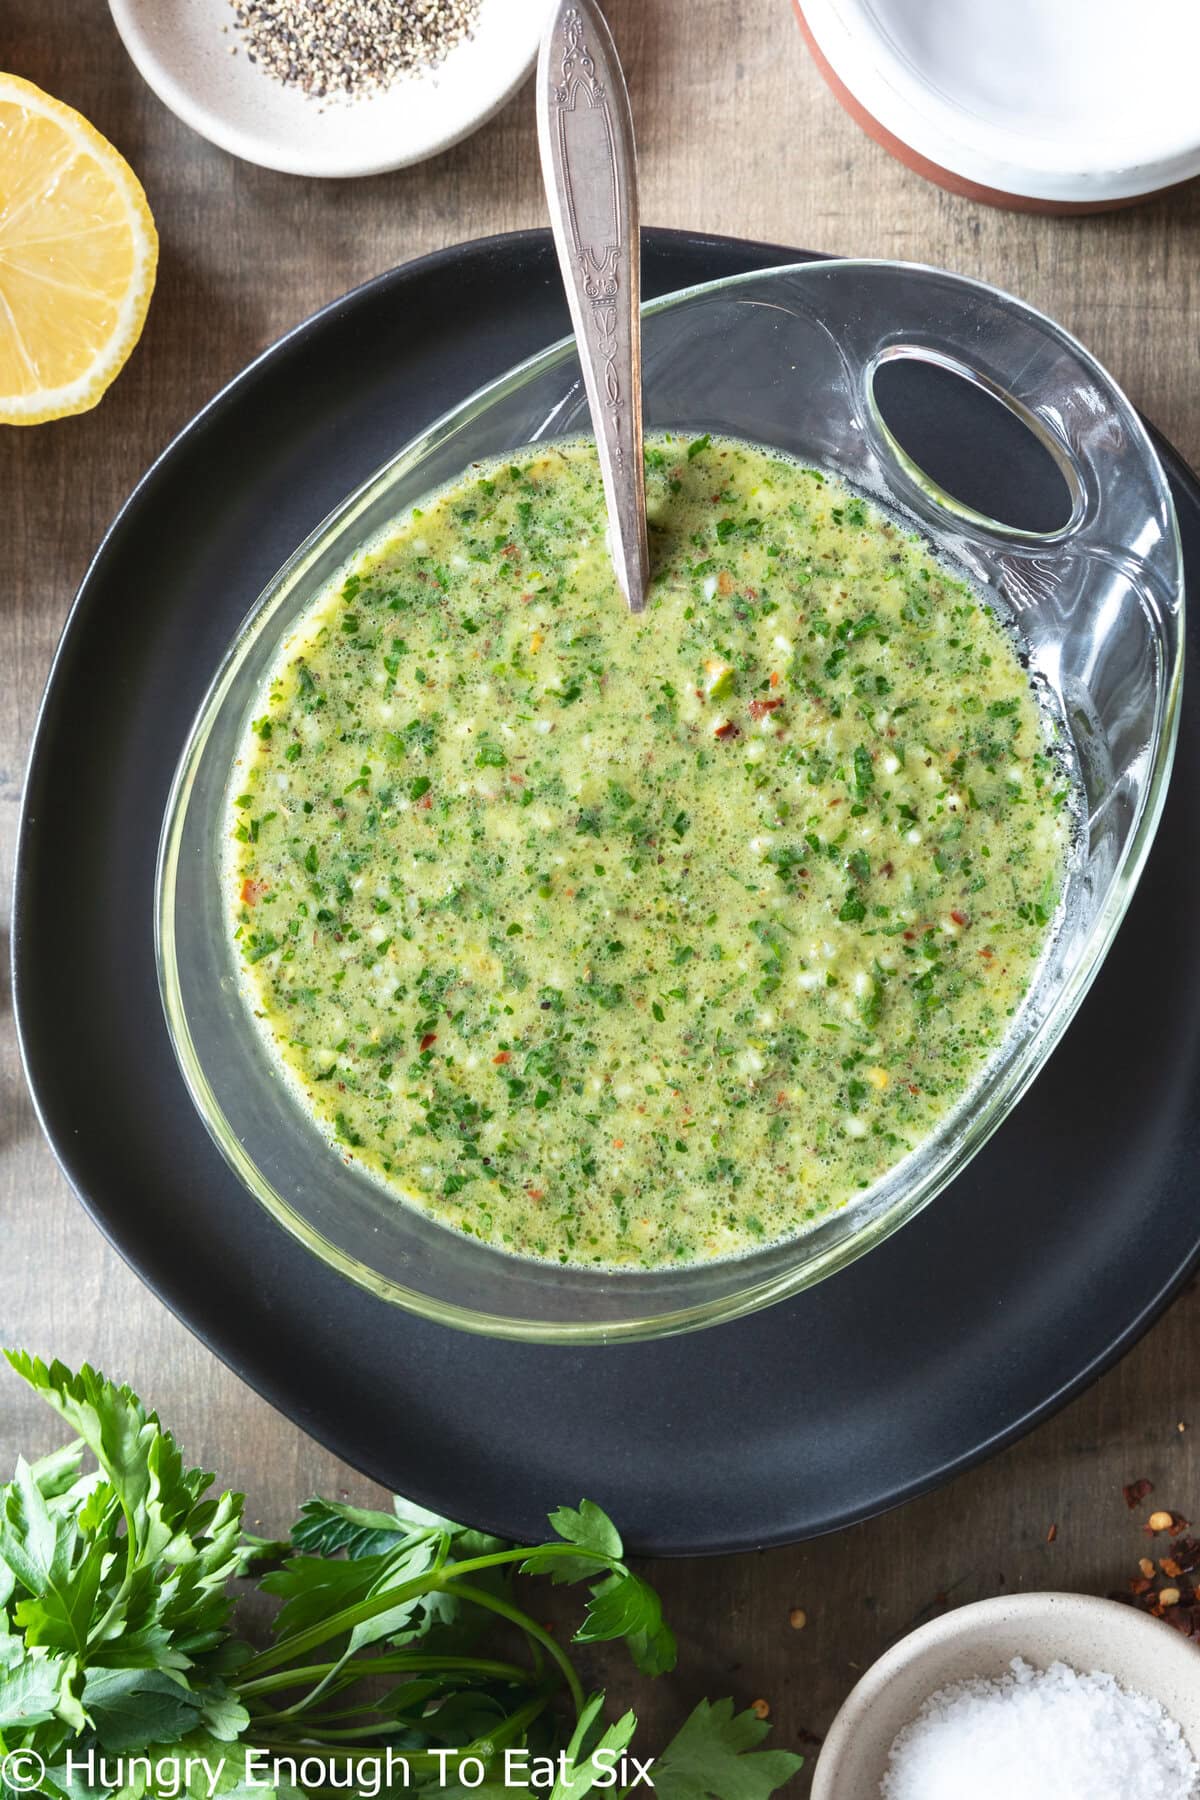 Bowl of green herb chimichurri sauce with spoon.